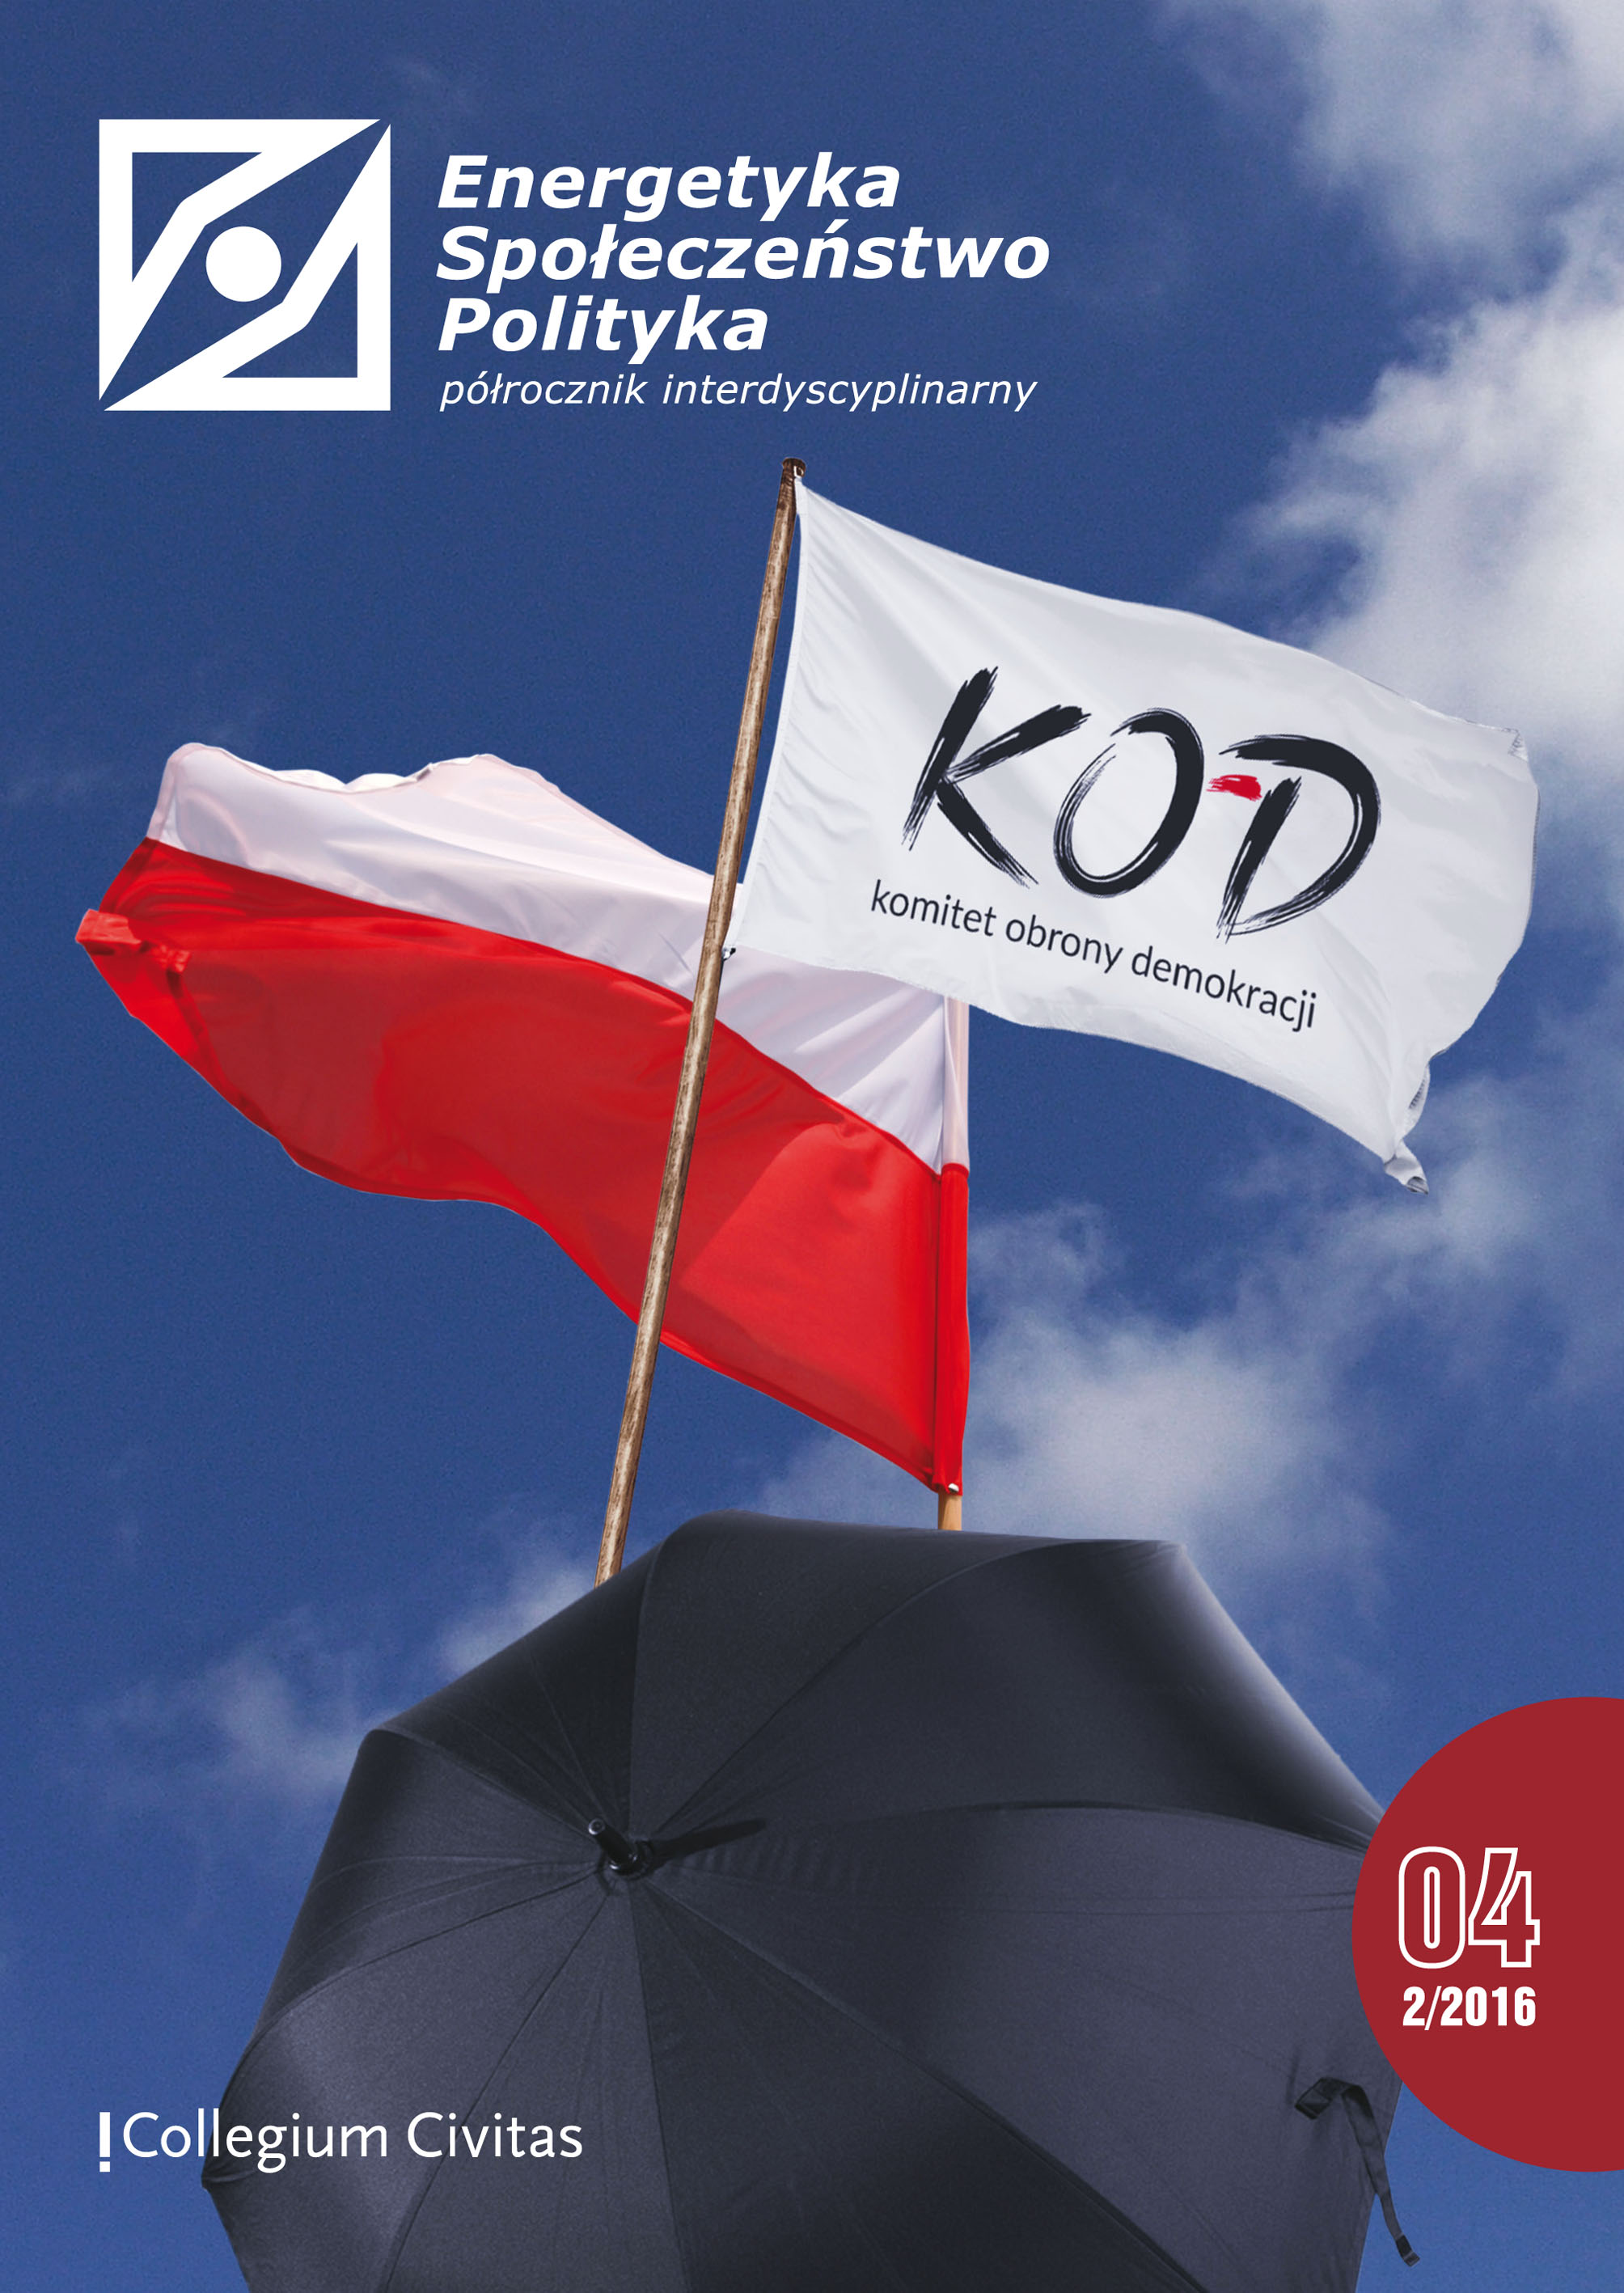 Global investment in Renewable Energy Sources – warning for Poland Cover Image